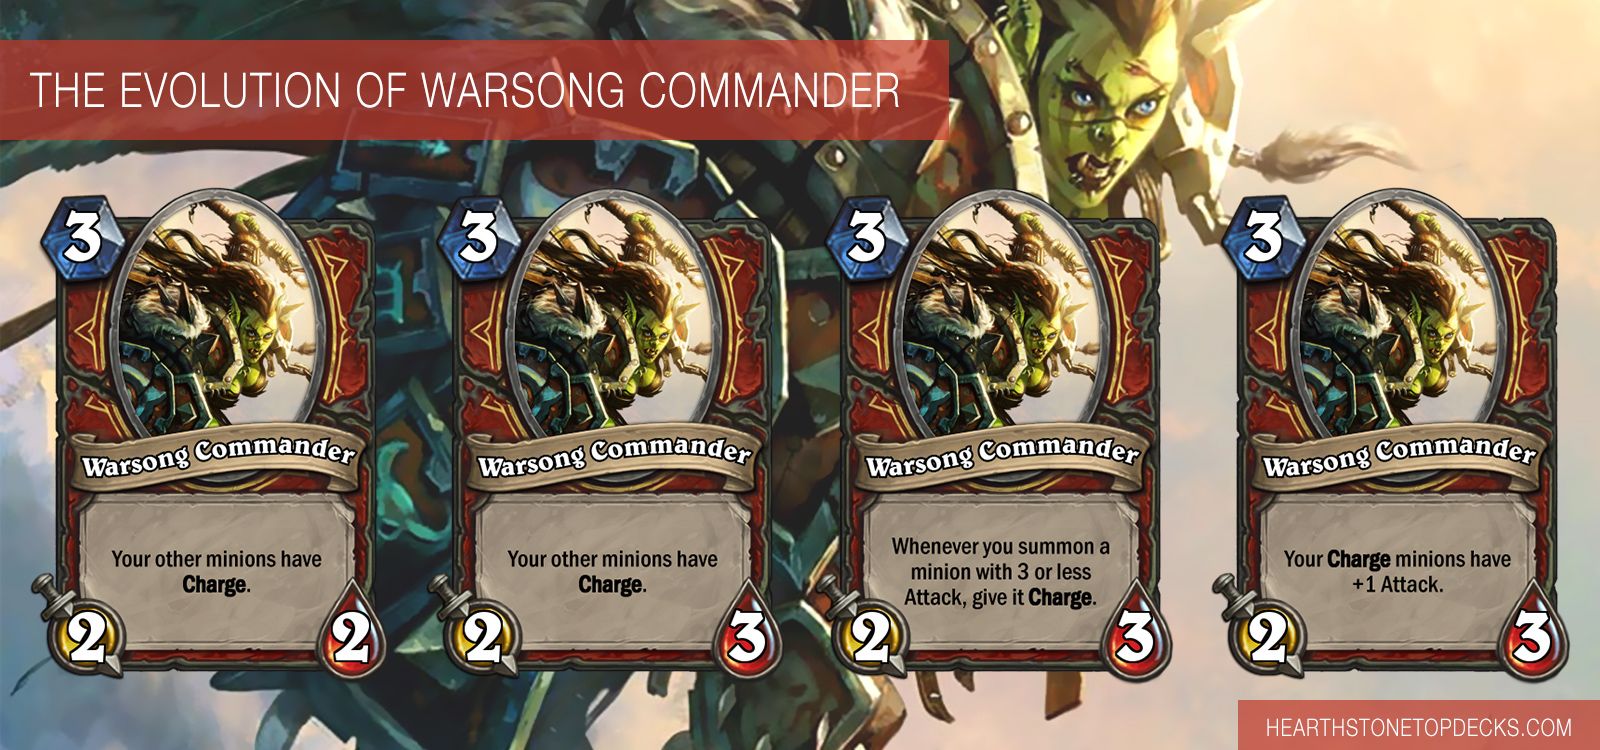 The evolution of the *Warsong Commander* card